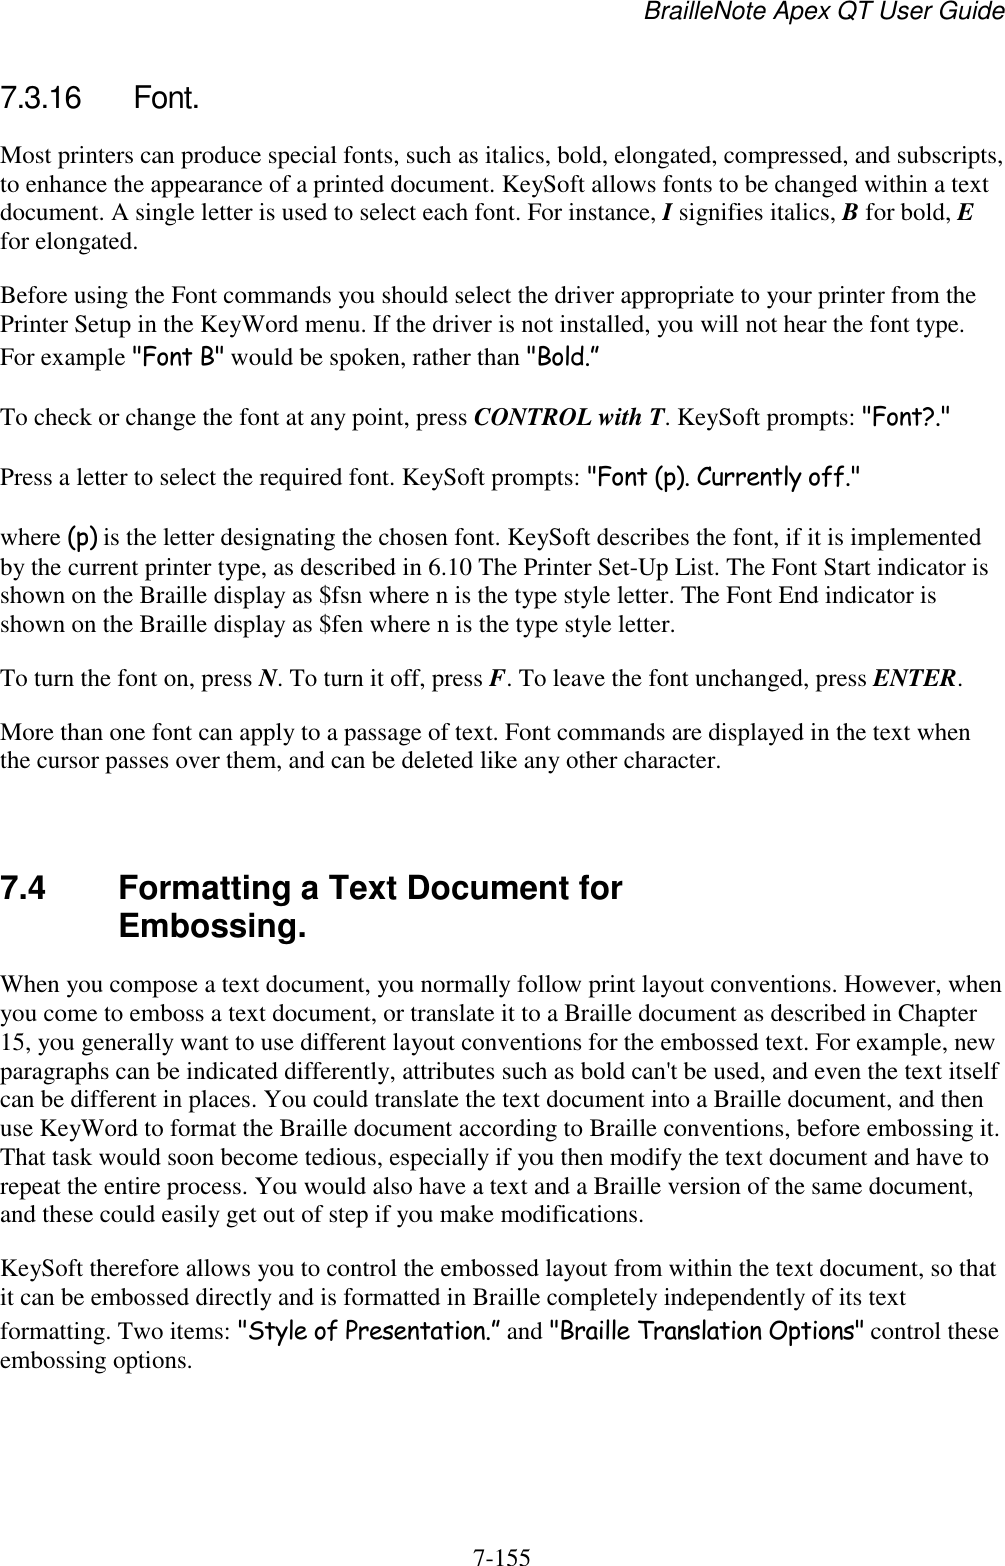 BrailleNote Apex QT User Guide  7-155   7.3.16  Font. Most printers can produce special fonts, such as italics, bold, elongated, compressed, and subscripts, to enhance the appearance of a printed document. KeySoft allows fonts to be changed within a text document. A single letter is used to select each font. For instance, I signifies italics, B for bold, E for elongated. Before using the Font commands you should select the driver appropriate to your printer from the Printer Setup in the KeyWord menu. If the driver is not installed, you will not hear the font type. For example &quot;Font B&quot; would be spoken, rather than &quot;Bold.” To check or change the font at any point, press CONTROL with T. KeySoft prompts: &quot;Font?.&quot; Press a letter to select the required font. KeySoft prompts: &quot;Font (p). Currently off.&quot; where (p) is the letter designating the chosen font. KeySoft describes the font, if it is implemented by the current printer type, as described in 6.10 The Printer Set-Up List. The Font Start indicator is shown on the Braille display as $fsn where n is the type style letter. The Font End indicator is shown on the Braille display as $fen where n is the type style letter. To turn the font on, press N. To turn it off, press F. To leave the font unchanged, press ENTER. More than one font can apply to a passage of text. Font commands are displayed in the text when the cursor passes over them, and can be deleted like any other character.   7.4  Formatting a Text Document for Embossing. When you compose a text document, you normally follow print layout conventions. However, when you come to emboss a text document, or translate it to a Braille document as described in Chapter 15, you generally want to use different layout conventions for the embossed text. For example, new paragraphs can be indicated differently, attributes such as bold can&apos;t be used, and even the text itself can be different in places. You could translate the text document into a Braille document, and then use KeyWord to format the Braille document according to Braille conventions, before embossing it. That task would soon become tedious, especially if you then modify the text document and have to repeat the entire process. You would also have a text and a Braille version of the same document, and these could easily get out of step if you make modifications. KeySoft therefore allows you to control the embossed layout from within the text document, so that it can be embossed directly and is formatted in Braille completely independently of its text formatting. Two items: &quot;Style of Presentation.” and &quot;Braille Translation Options&quot; control these embossing options.   